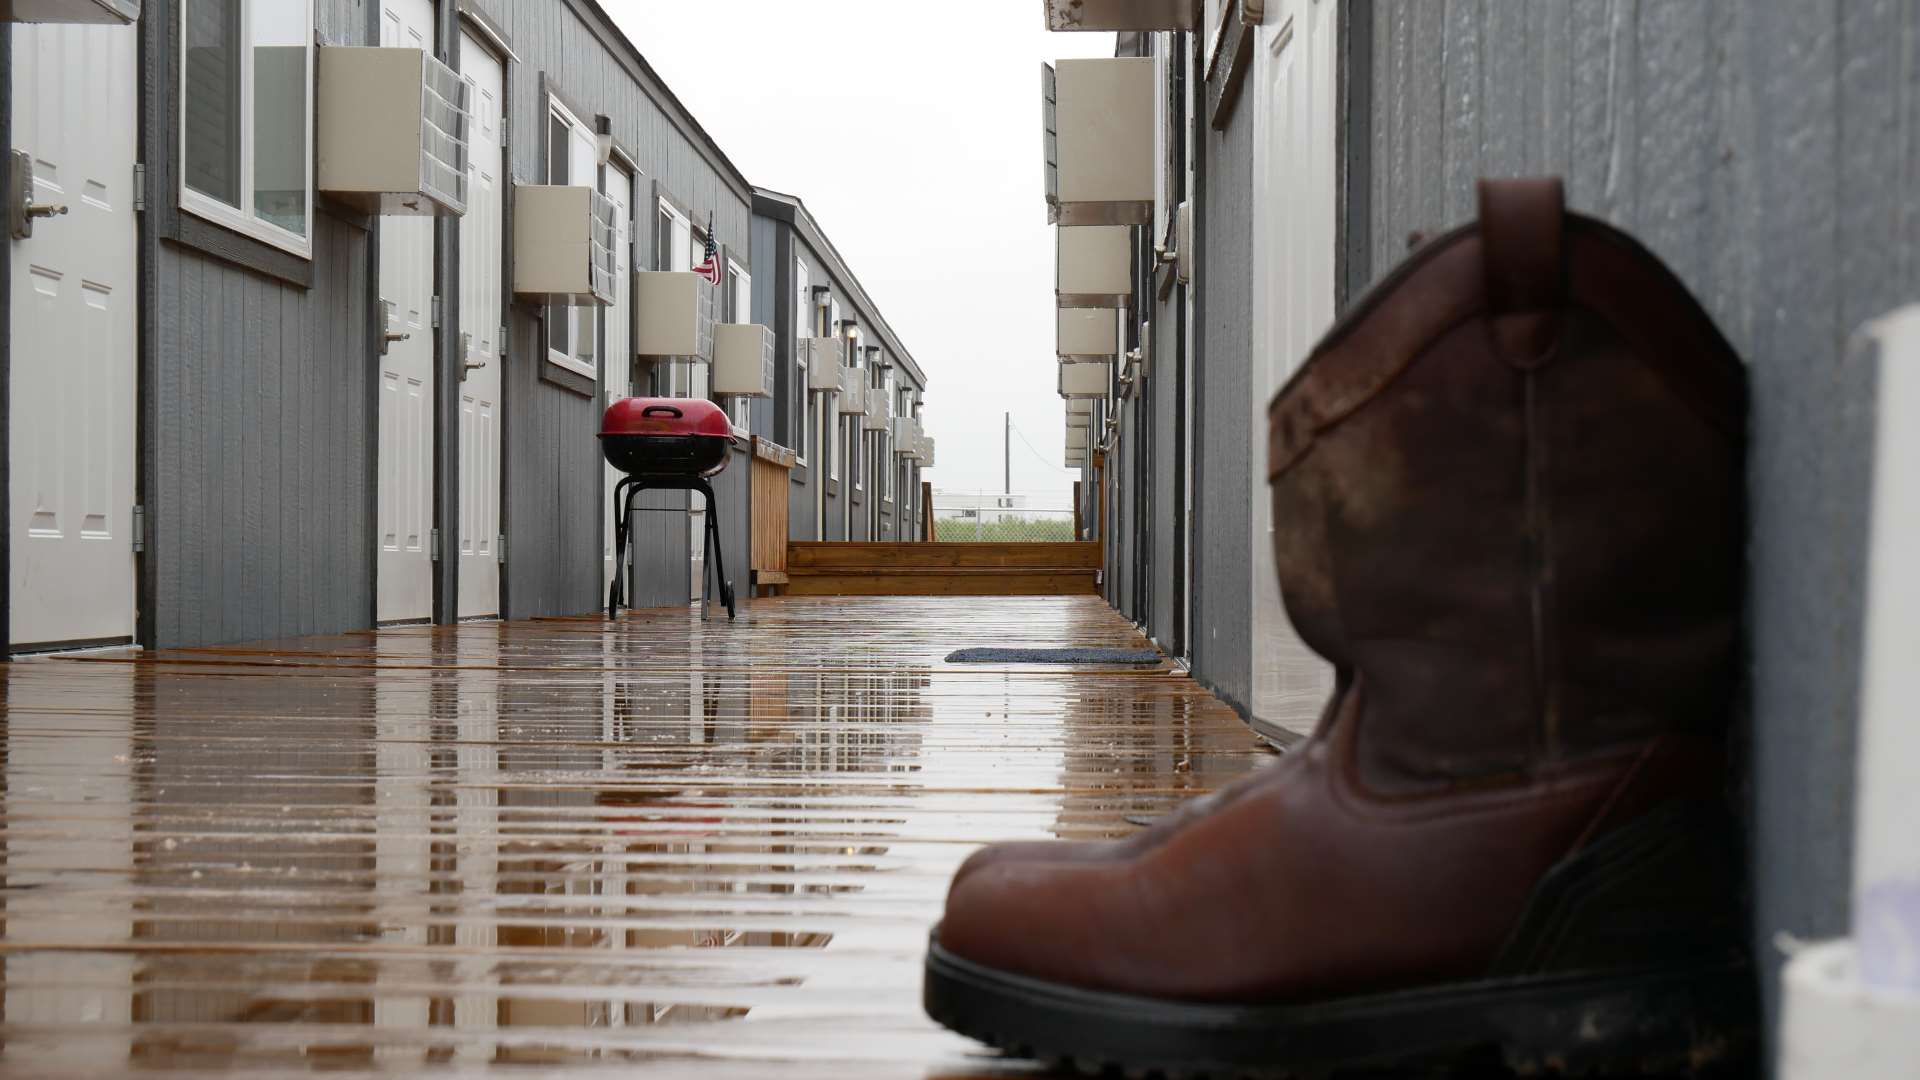 At one of Aries modular workforce camps, a light rain soaks into a wooden plank deck with rows of modular units serving as housing on either side.